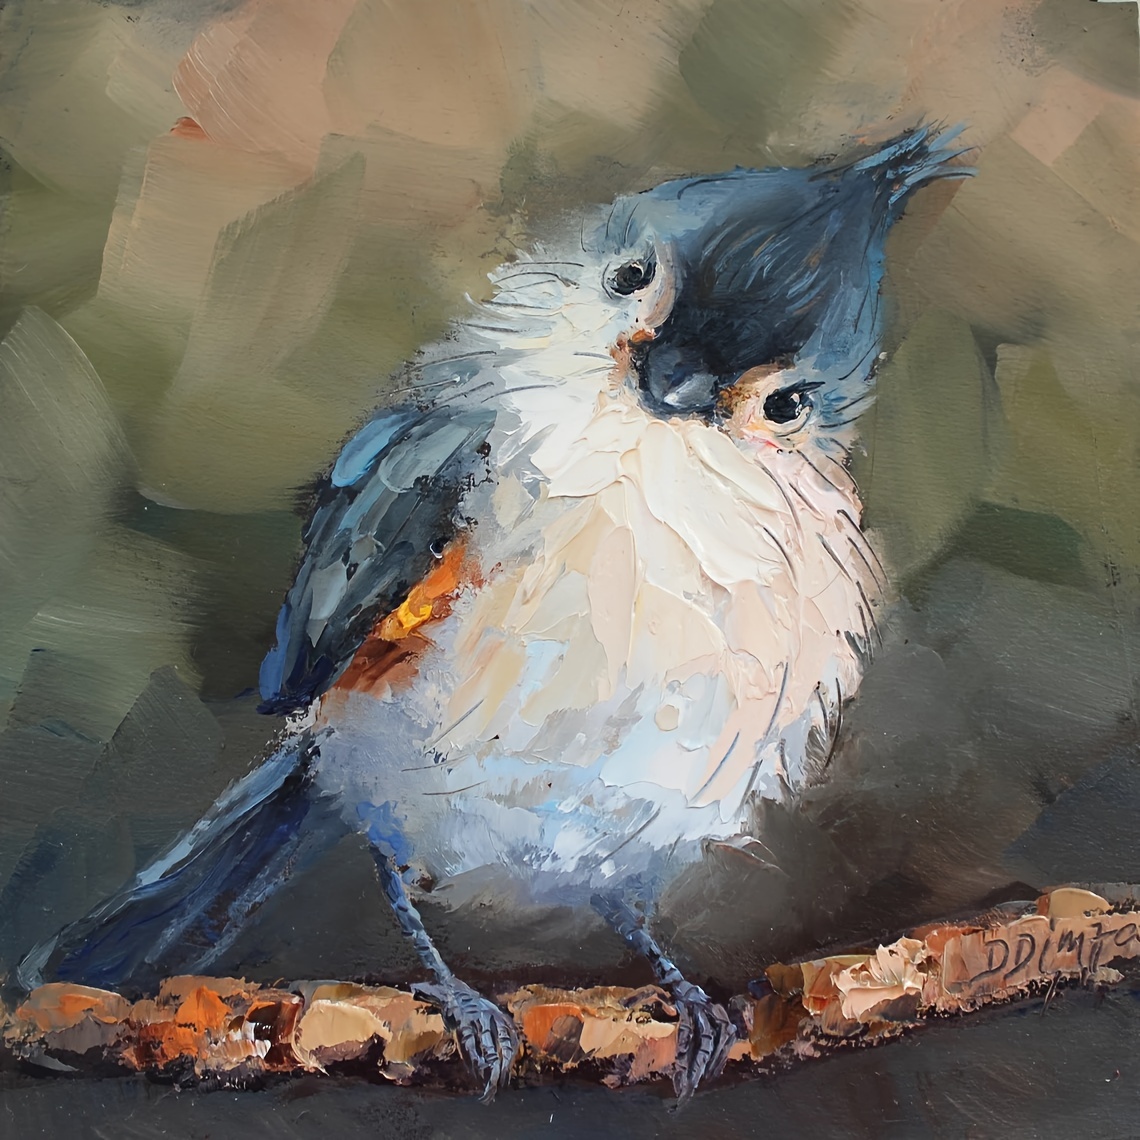 

1pc Frameless Tufted Titmouse Bird Oil Painting Canvas, Vibrant Abstract Art For Home Living Room Bedroom Study Bar Cafe Wall Decor - 12x12 Inches